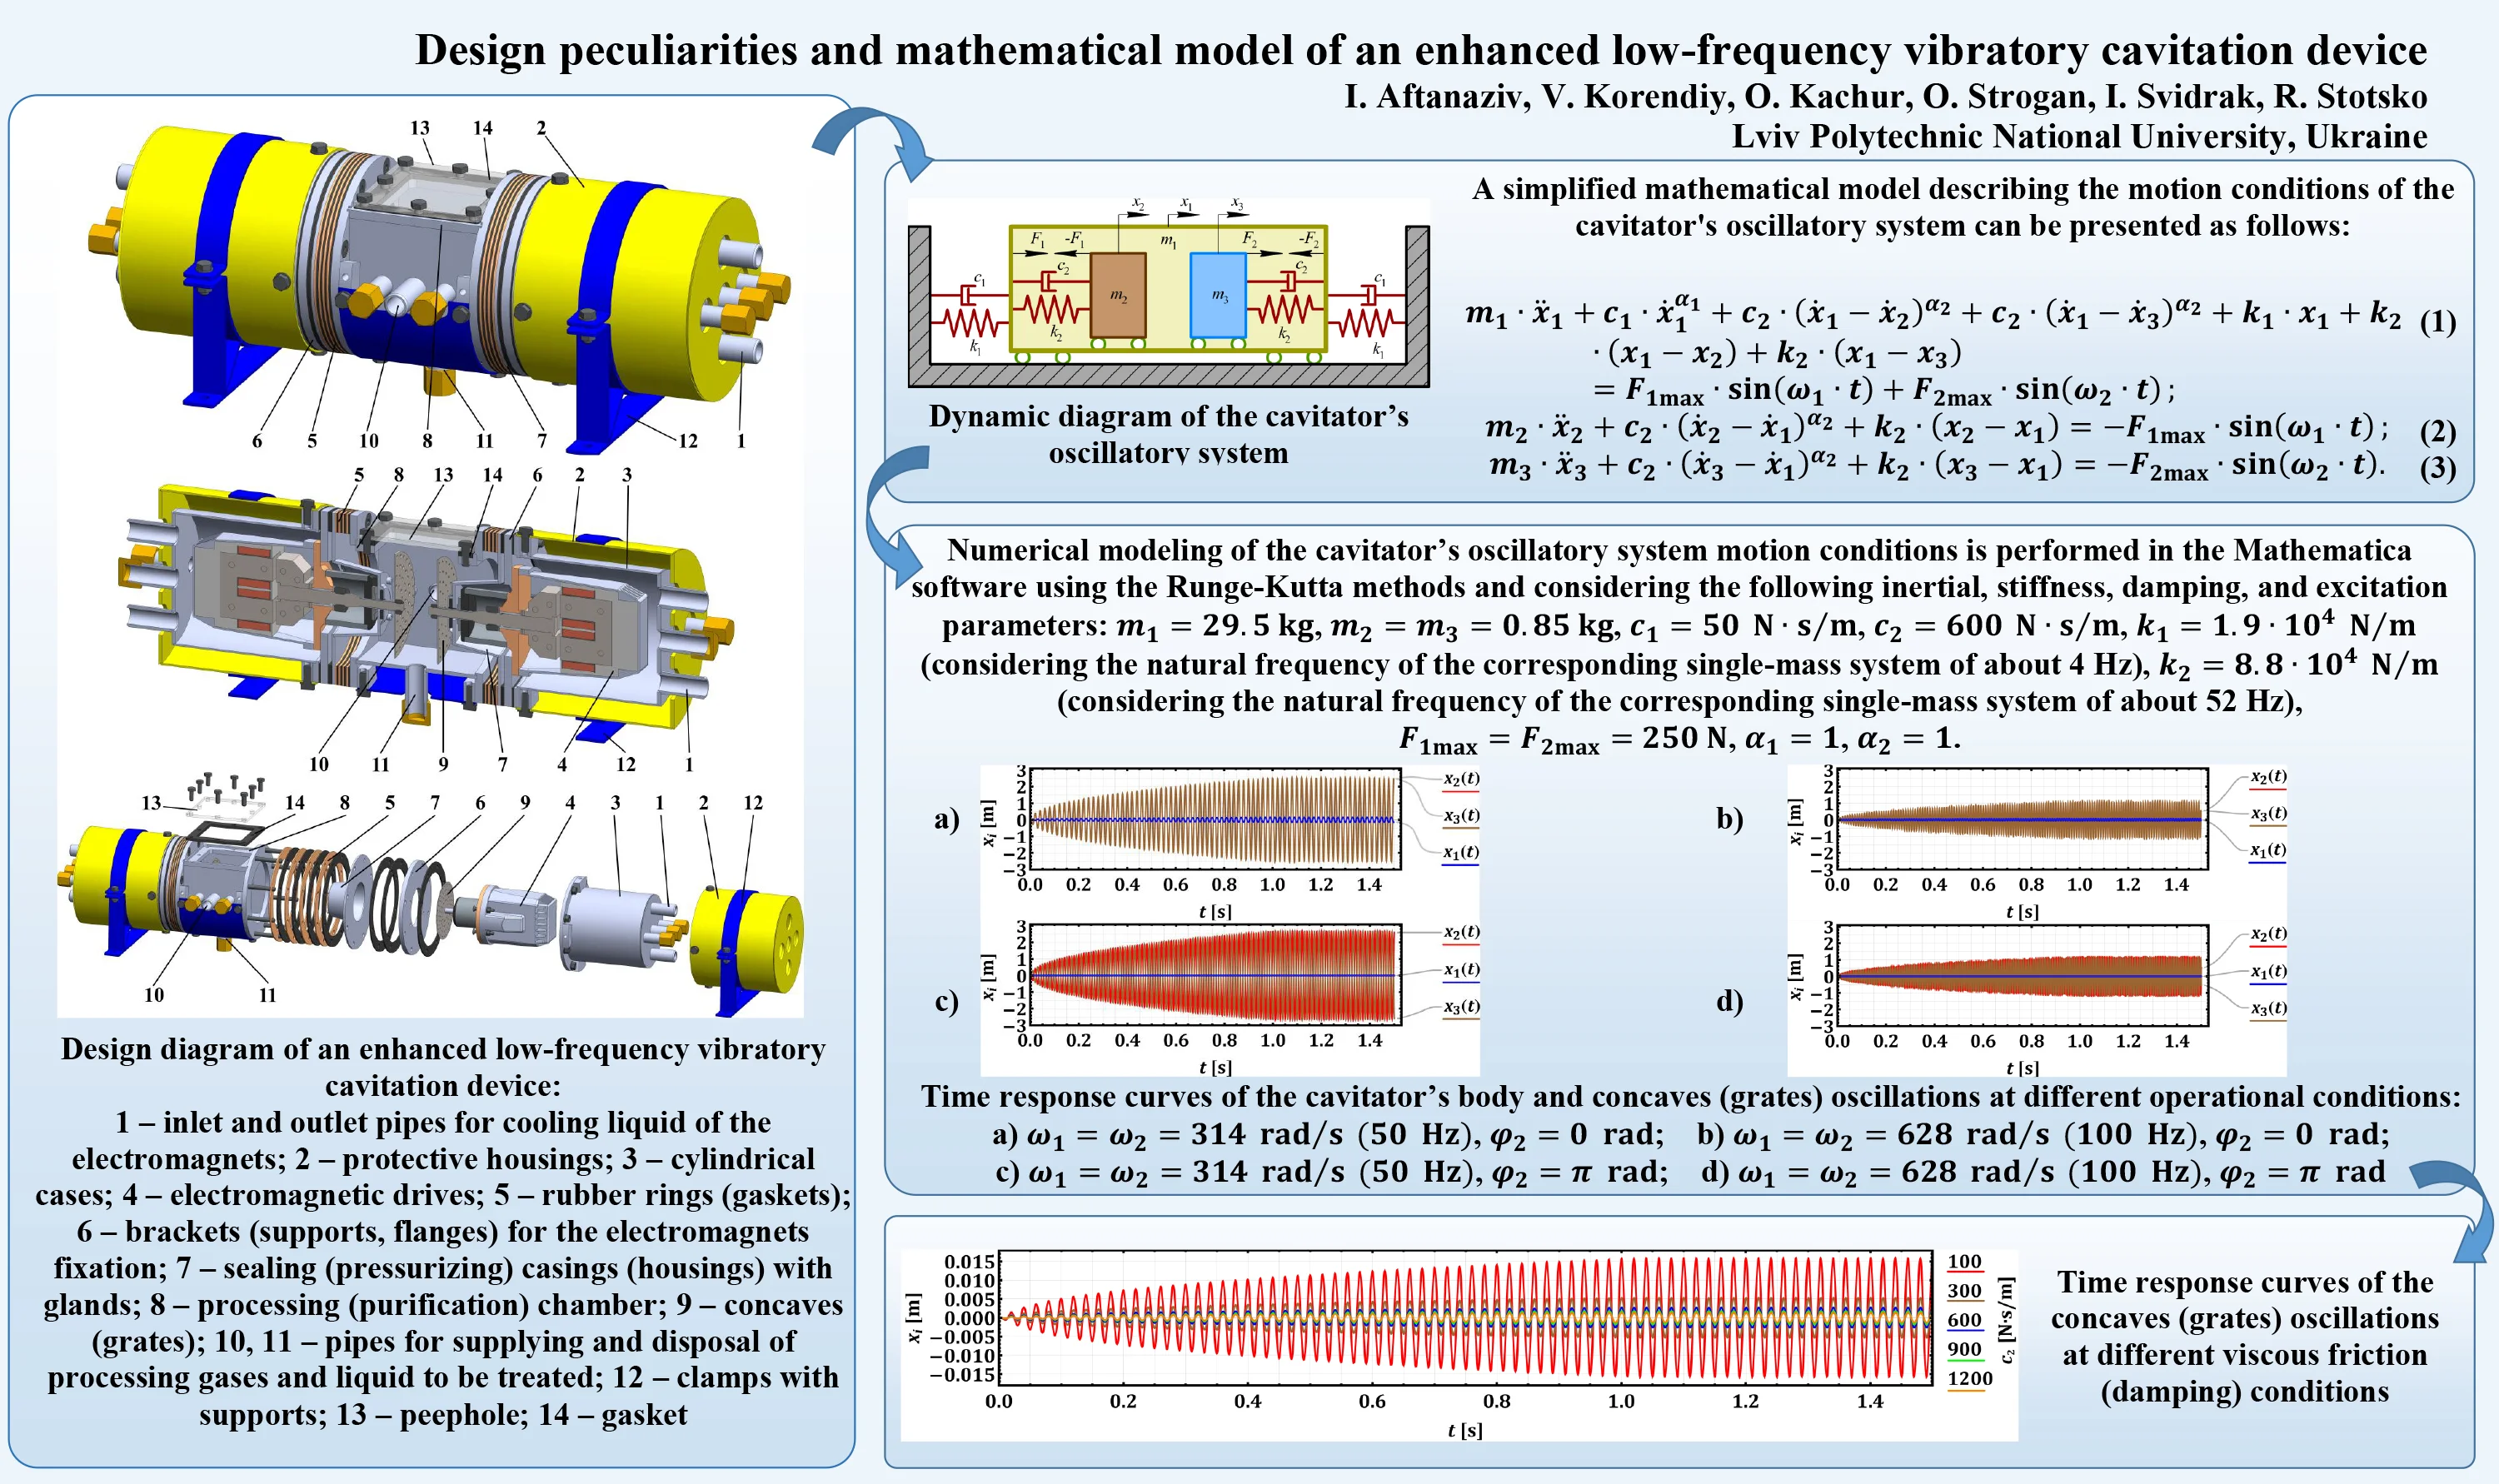 Design peculiarities and mathematical model of an enhanced low-frequency vibratory cavitation device